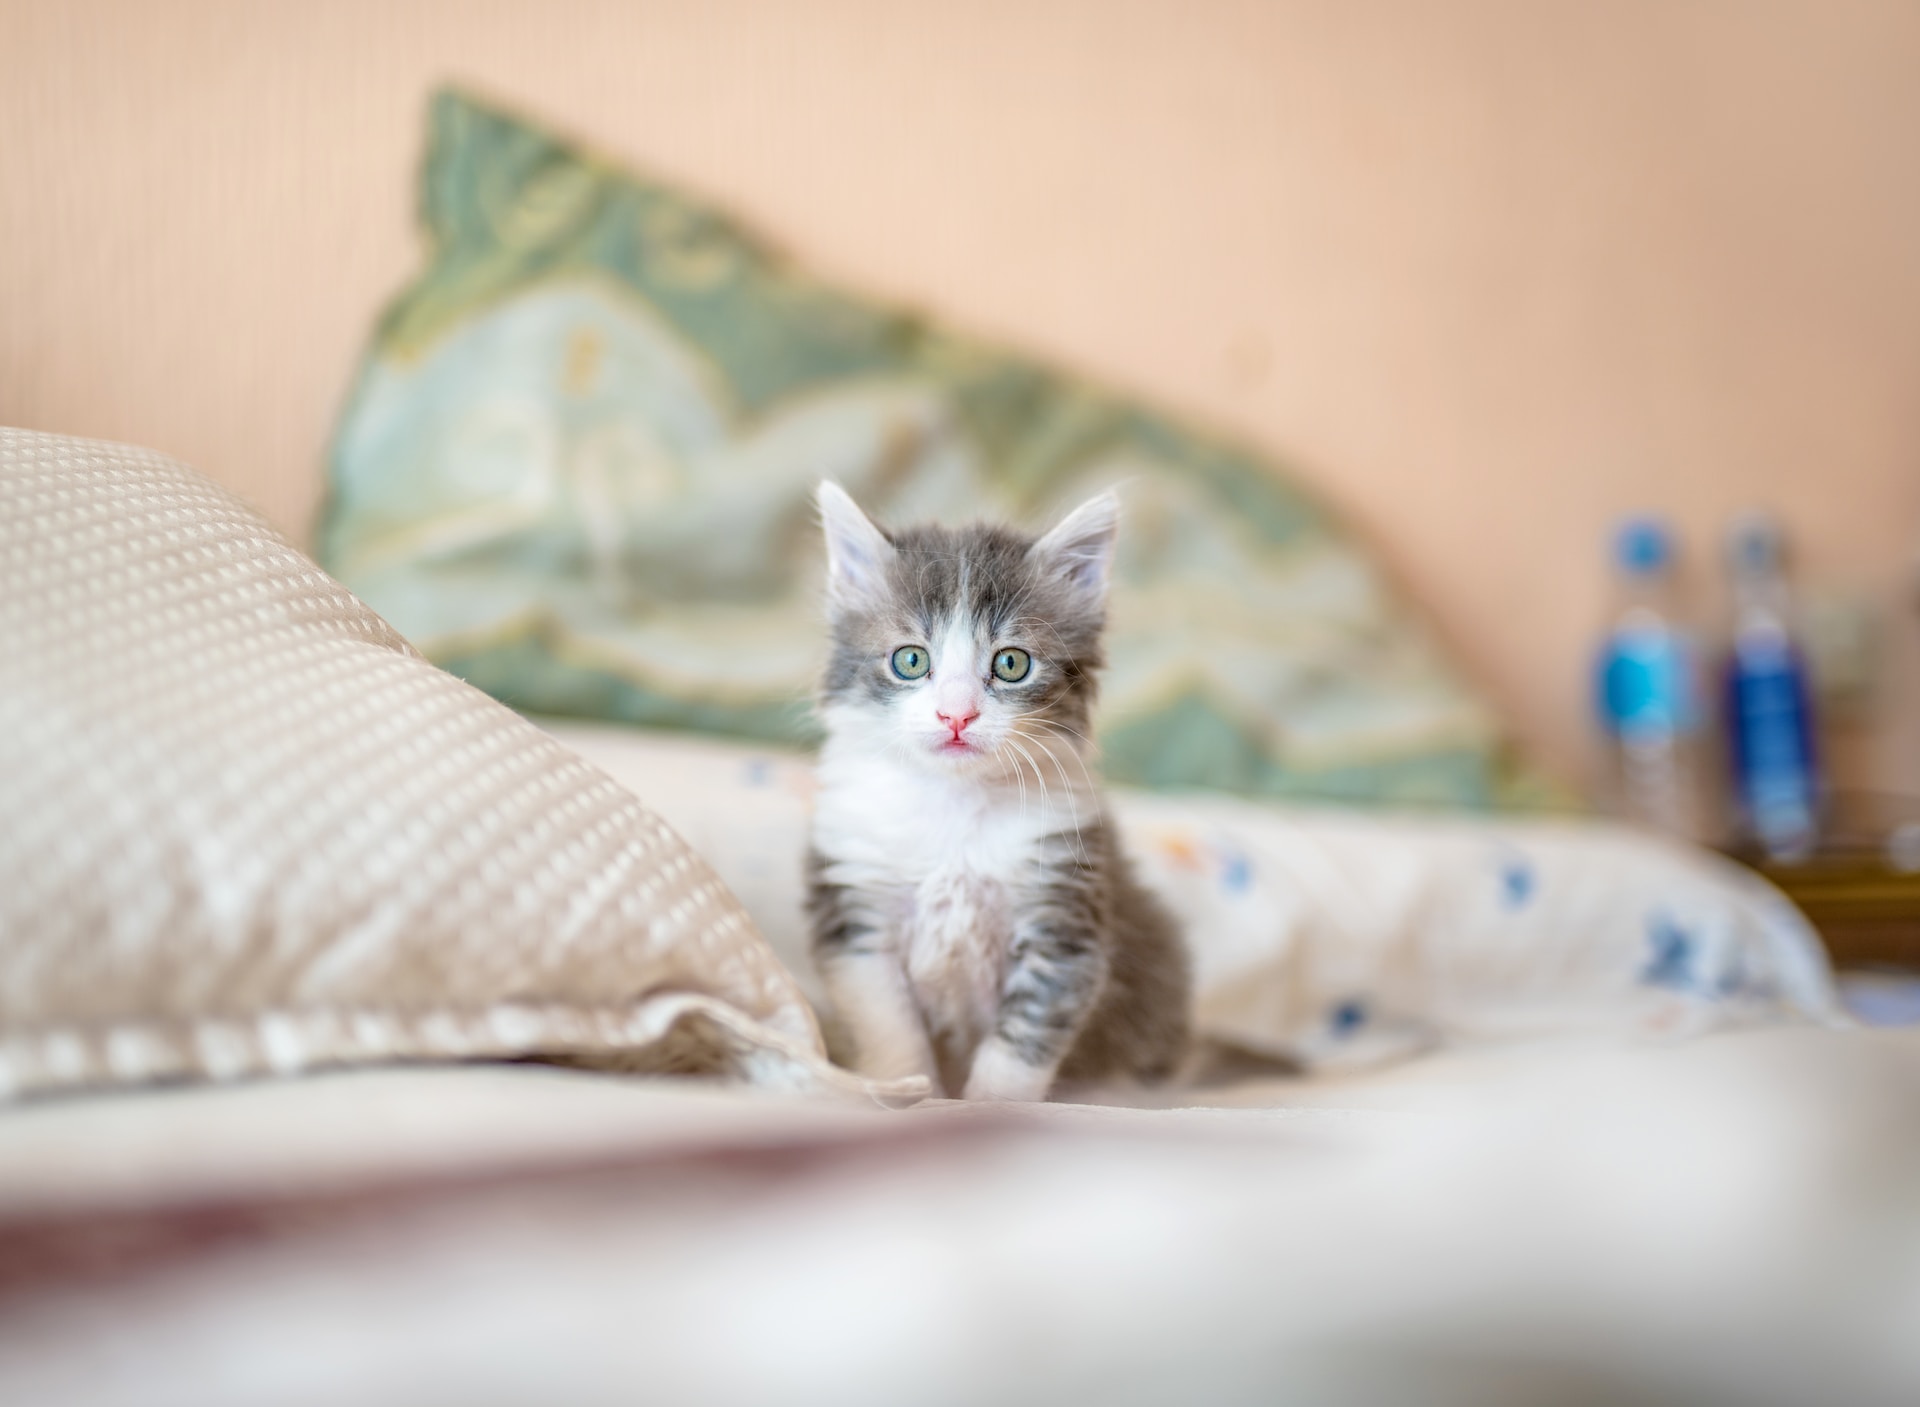 A kitten sitting next to a pillow on bed